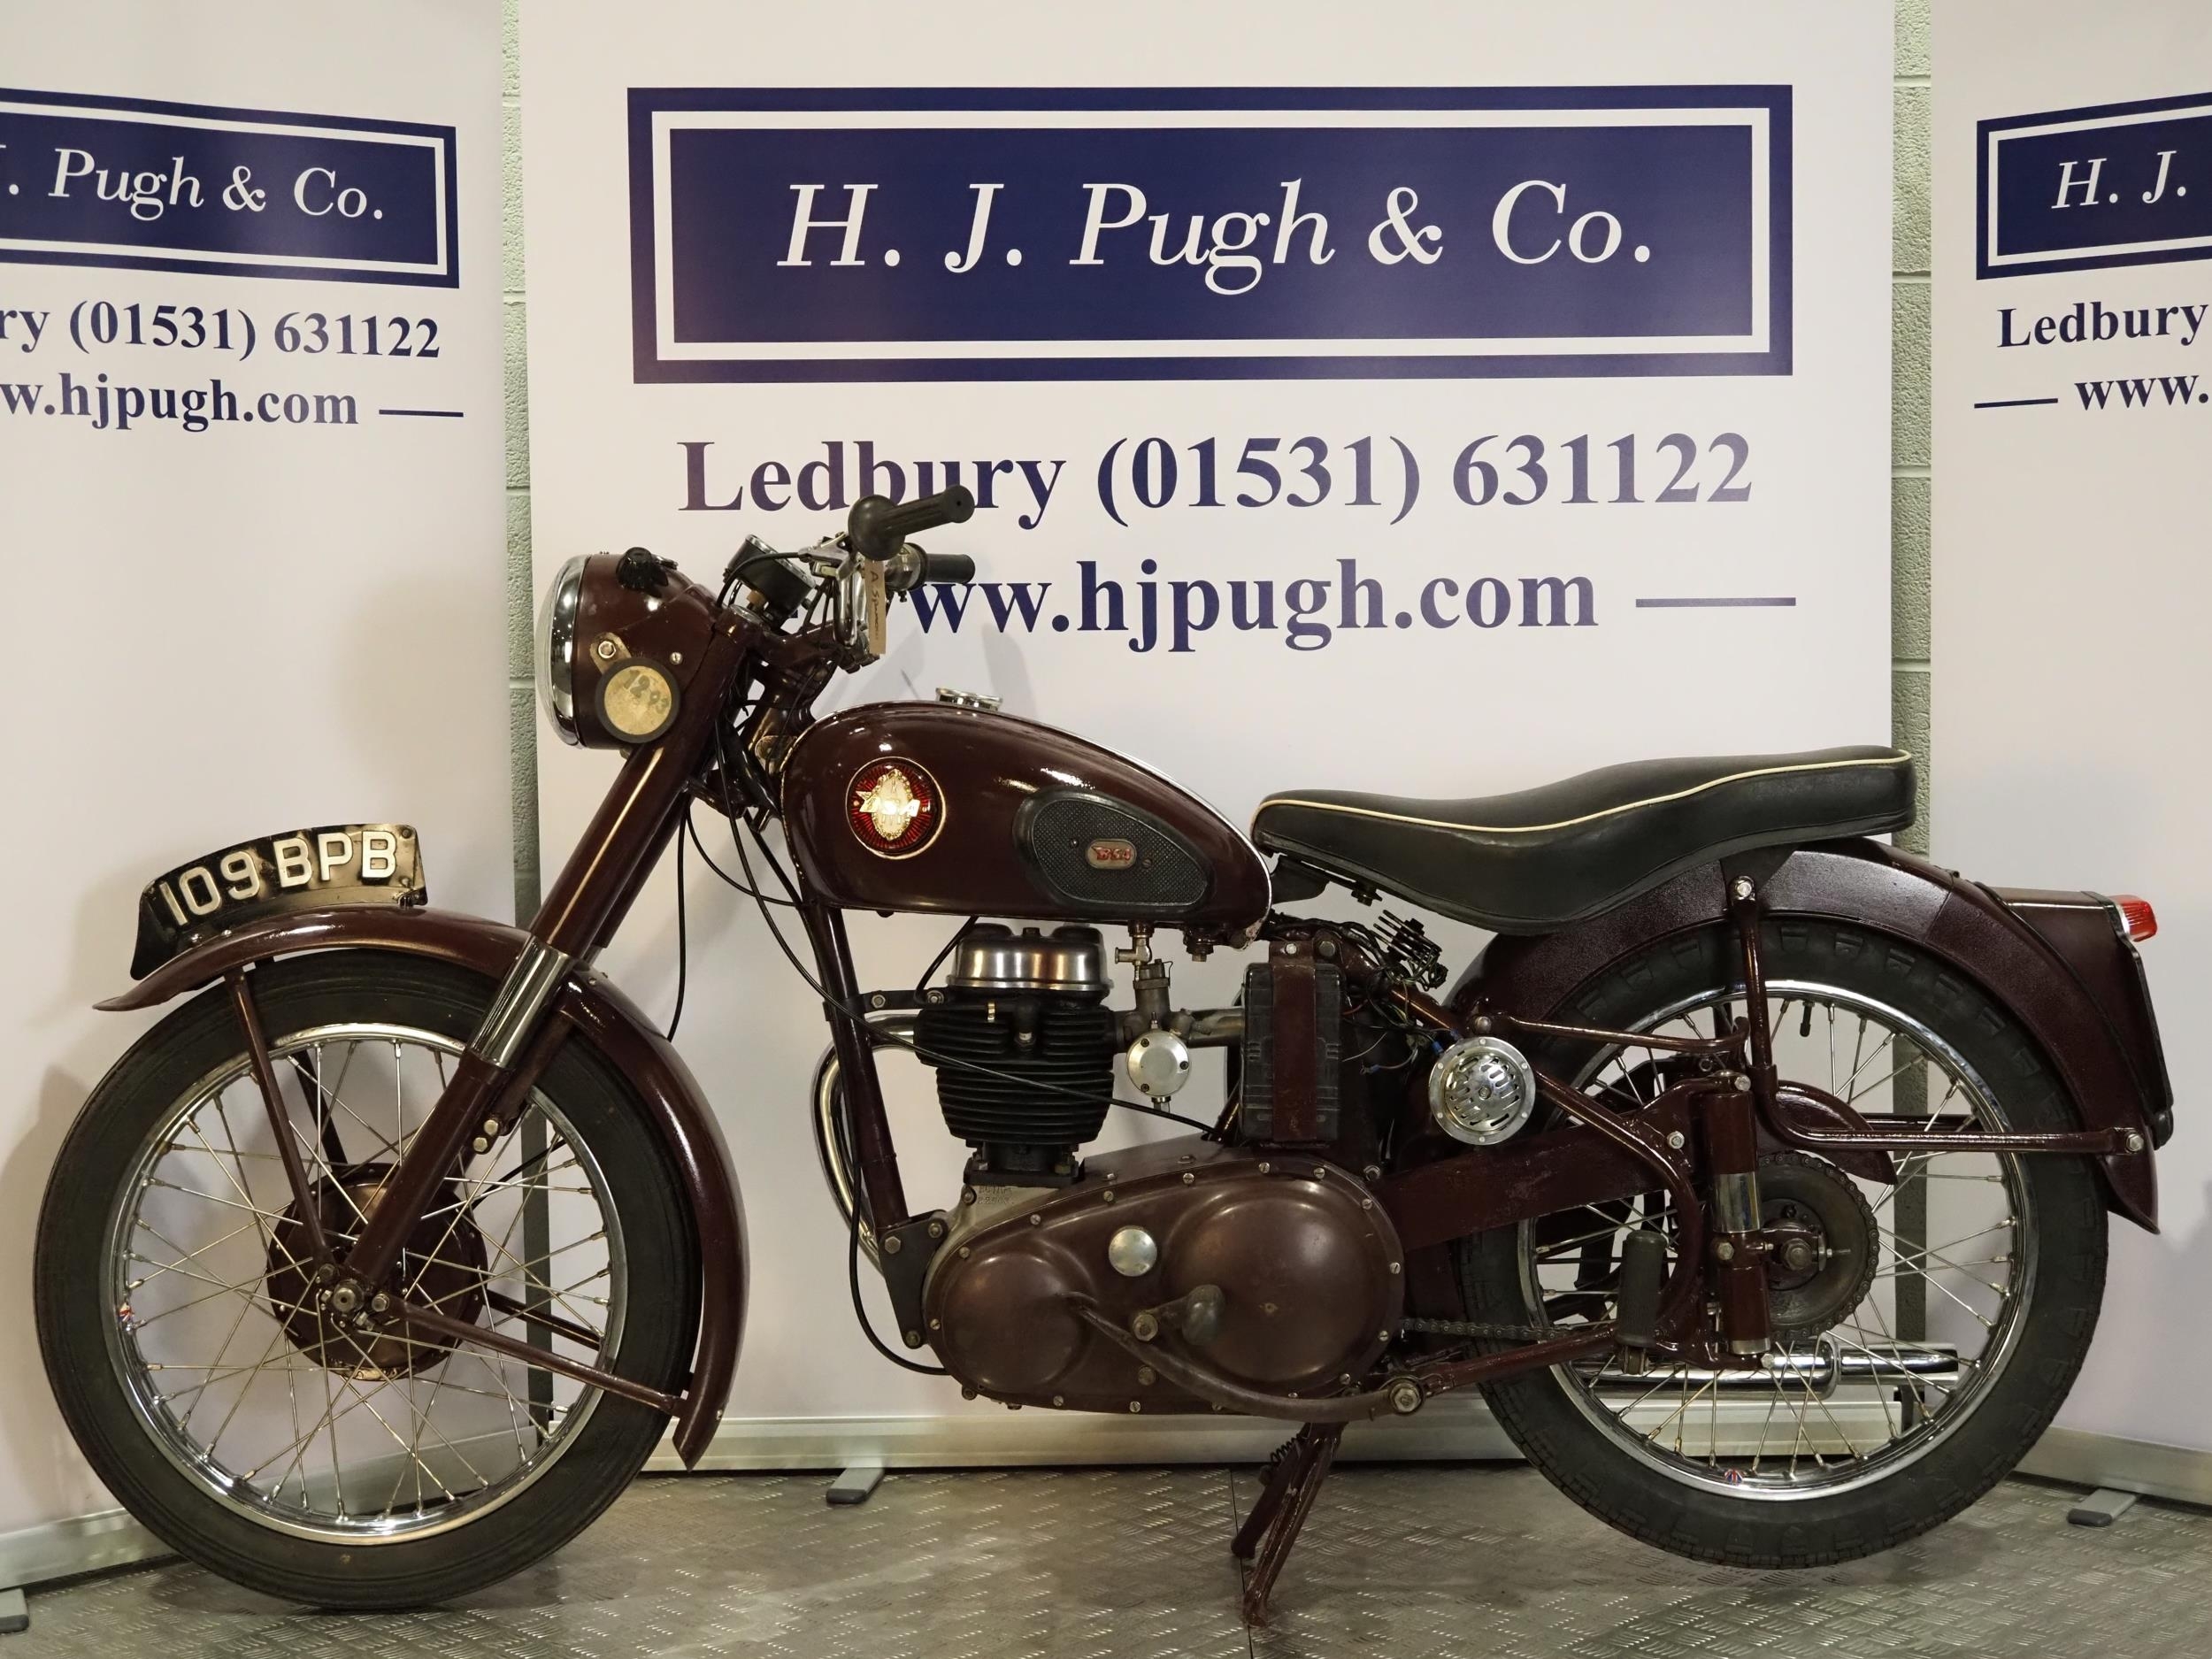 BSA C11G motorcycle. 1956. 250cc. Frame No. BC115416998 Engine No. BC11G22568 Engine turns over with - Image 6 of 6